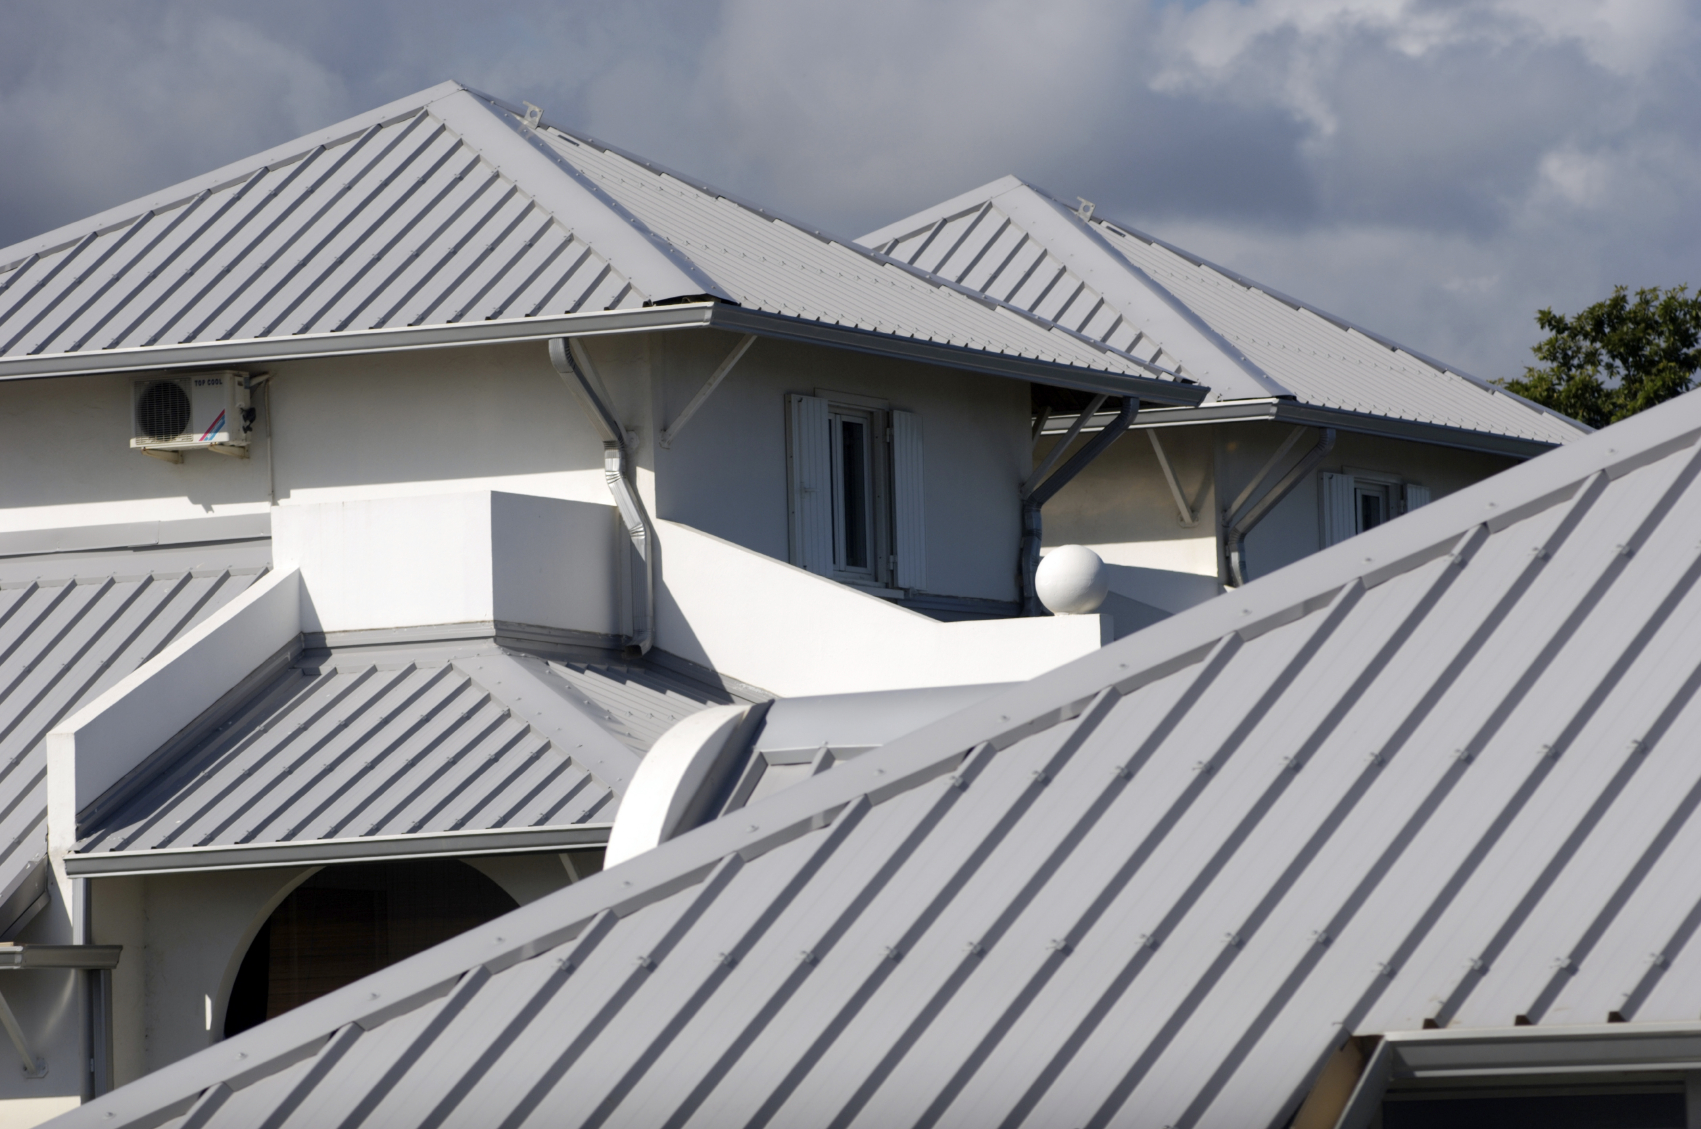 How to Choose the Best Metal Material for Your Roof